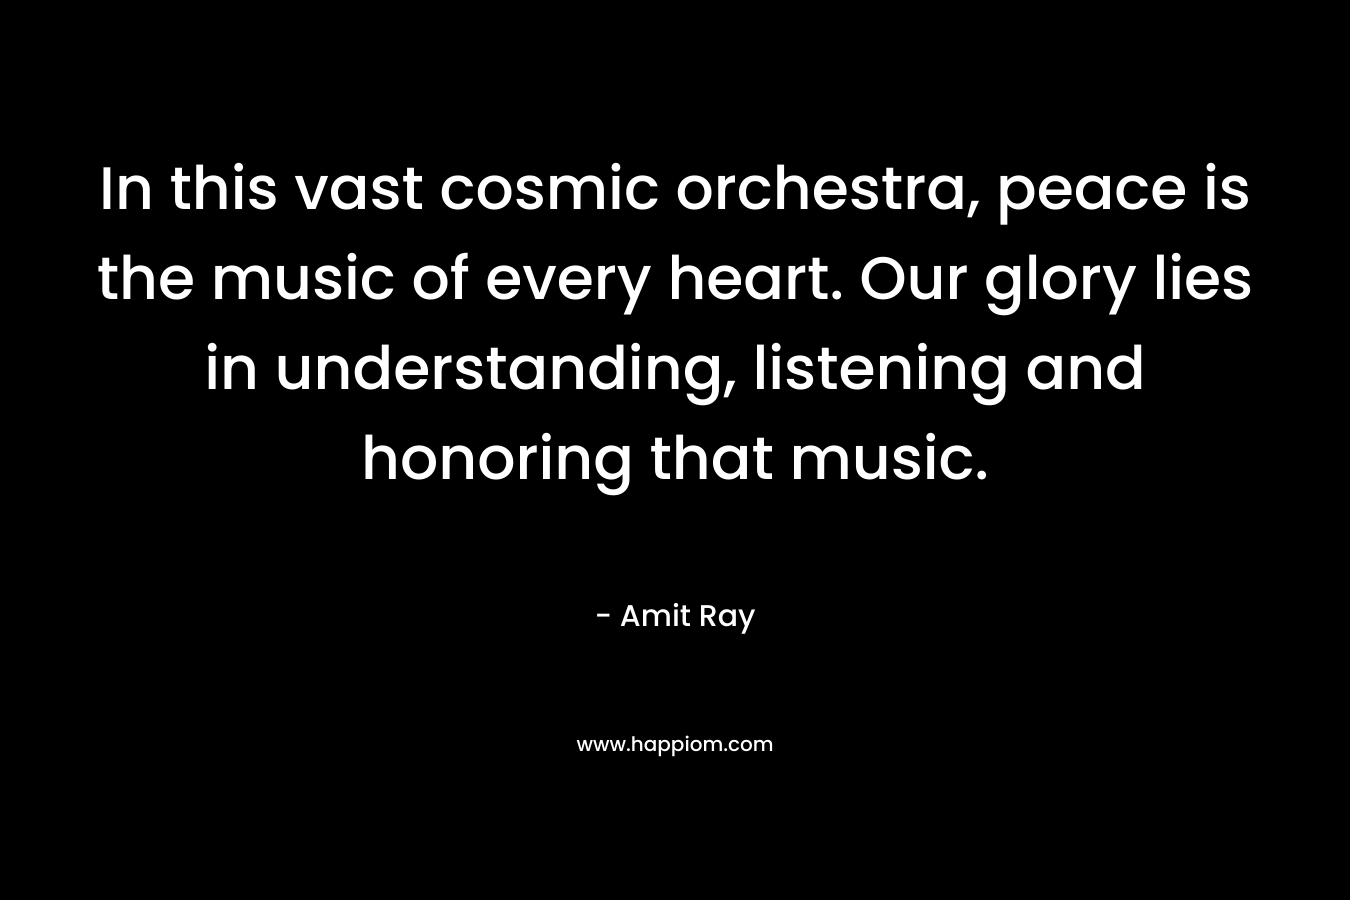 In this vast cosmic orchestra, peace is the music of every heart. Our glory lies in understanding, listening and honoring that music. – Amit Ray